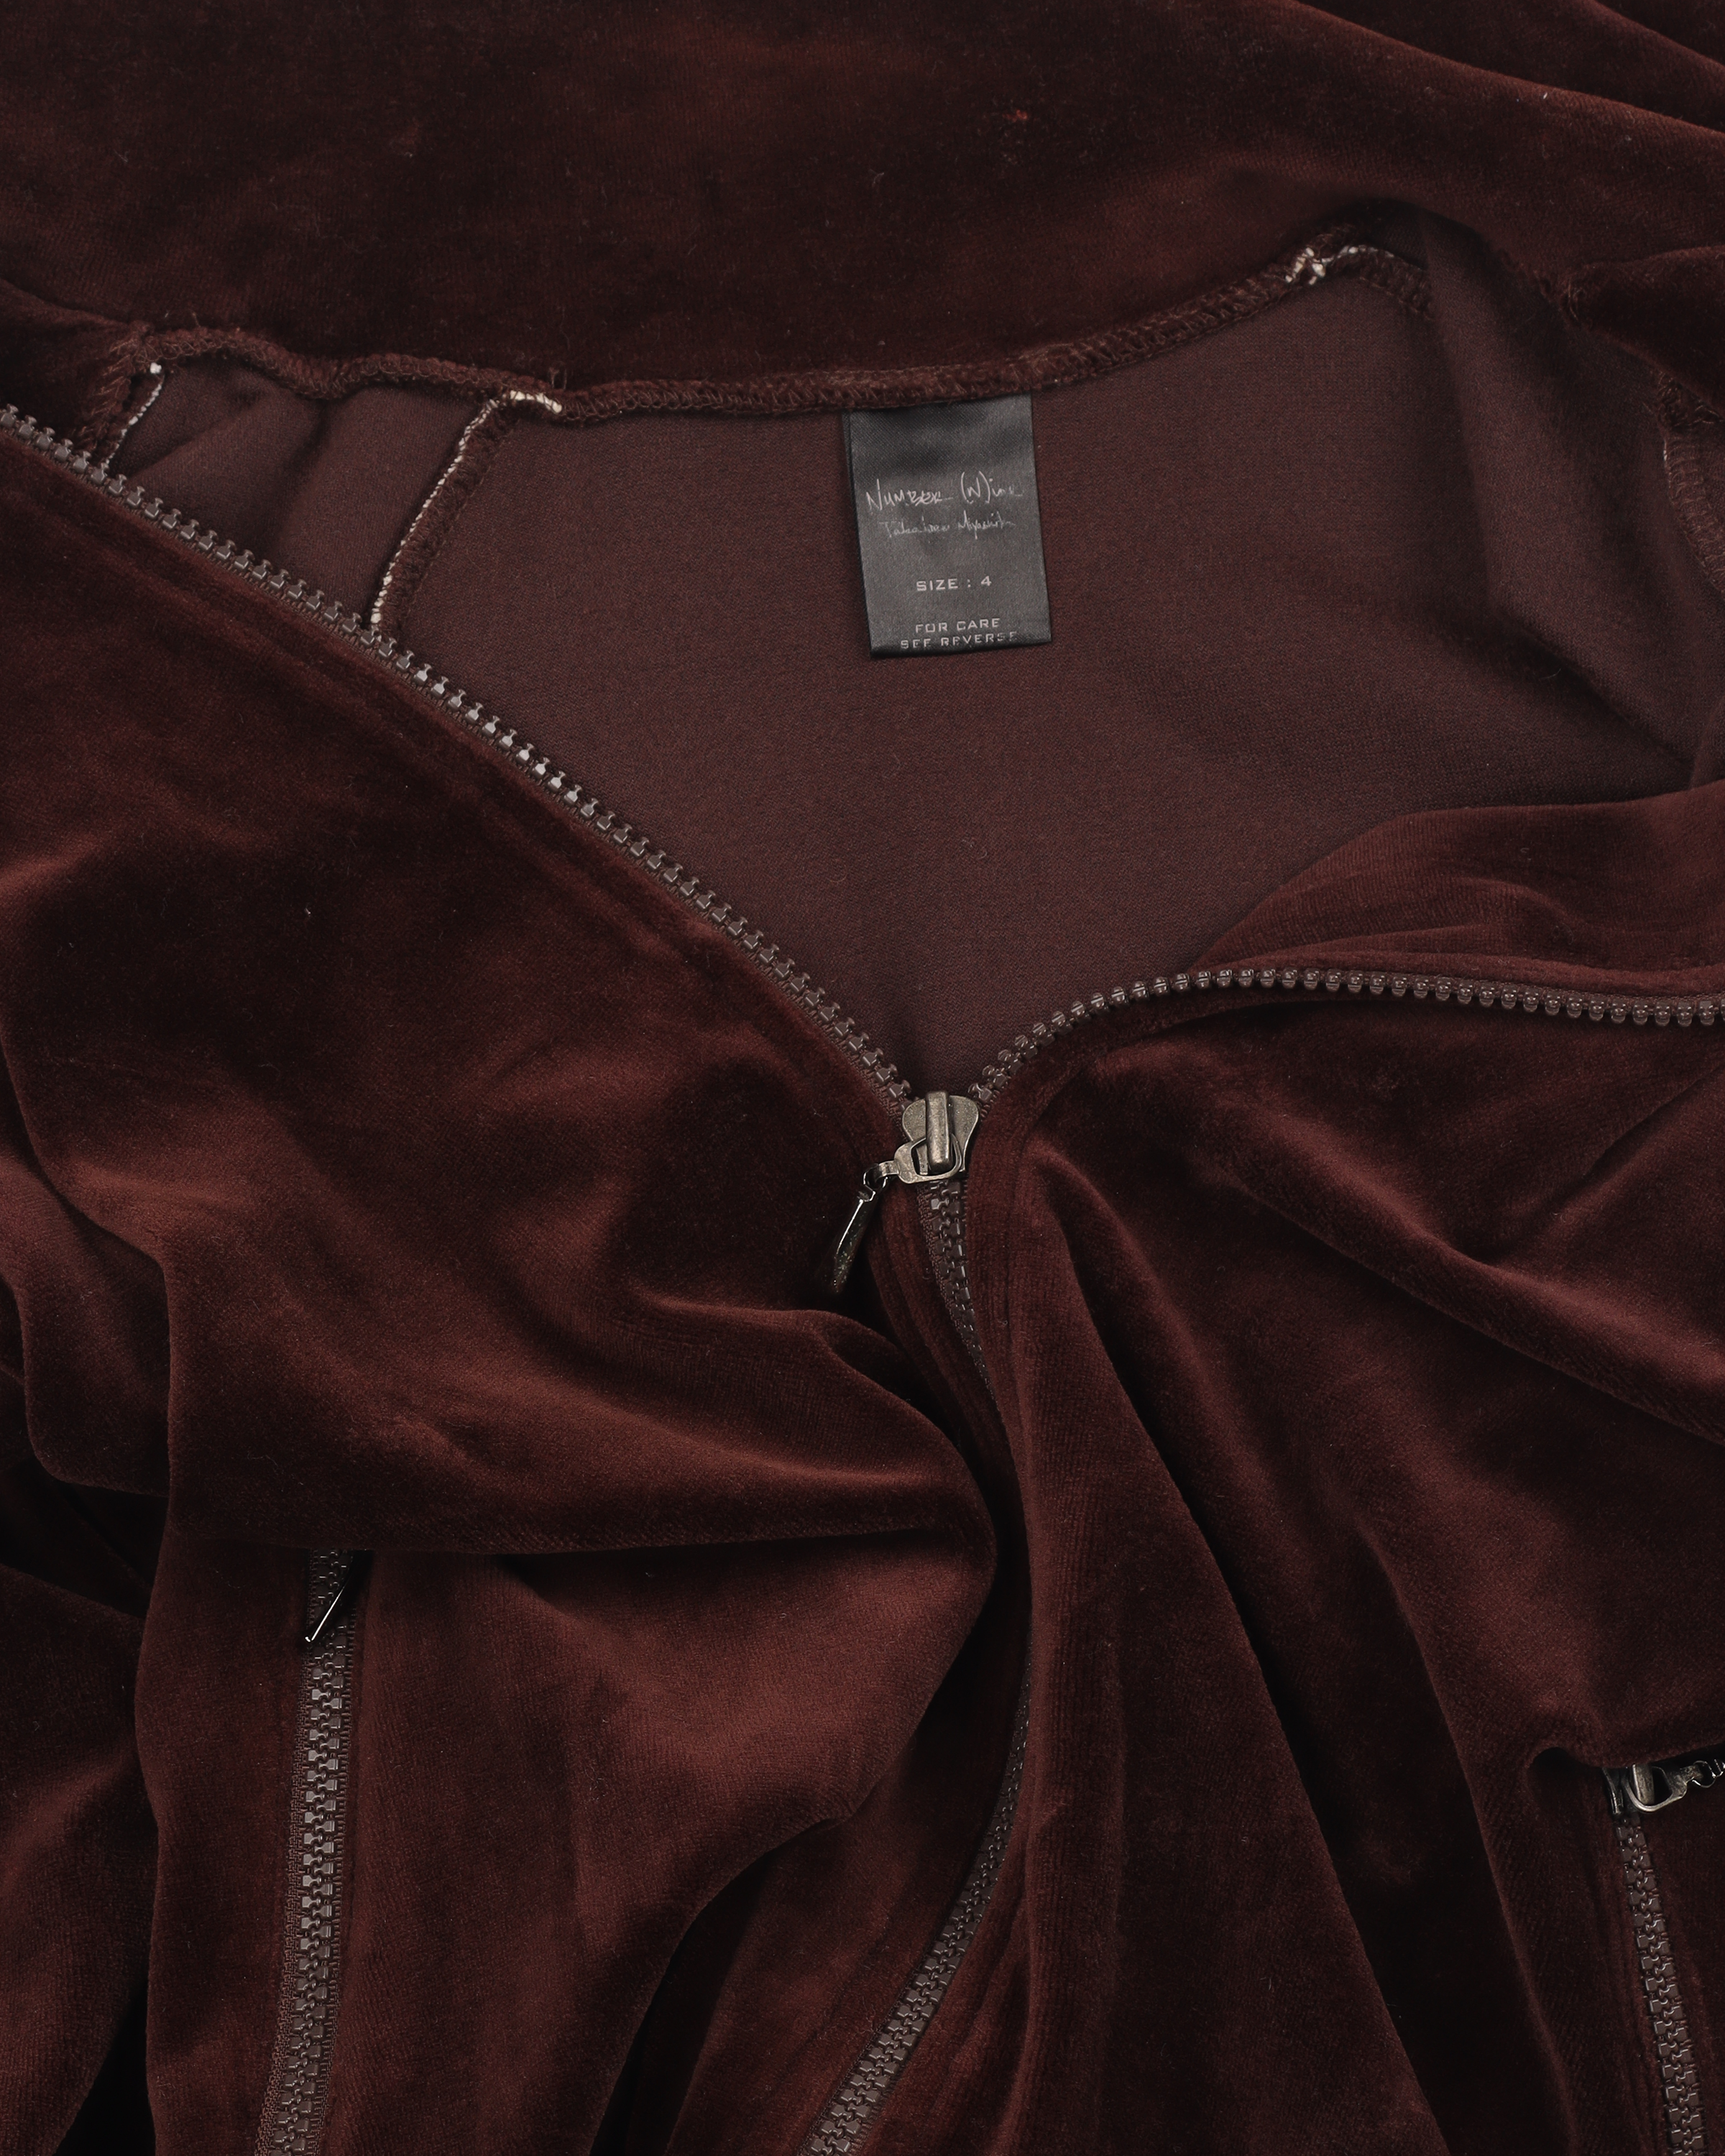 Brown Velour Track Jacket (2003) "Touch Me I'm Sick"